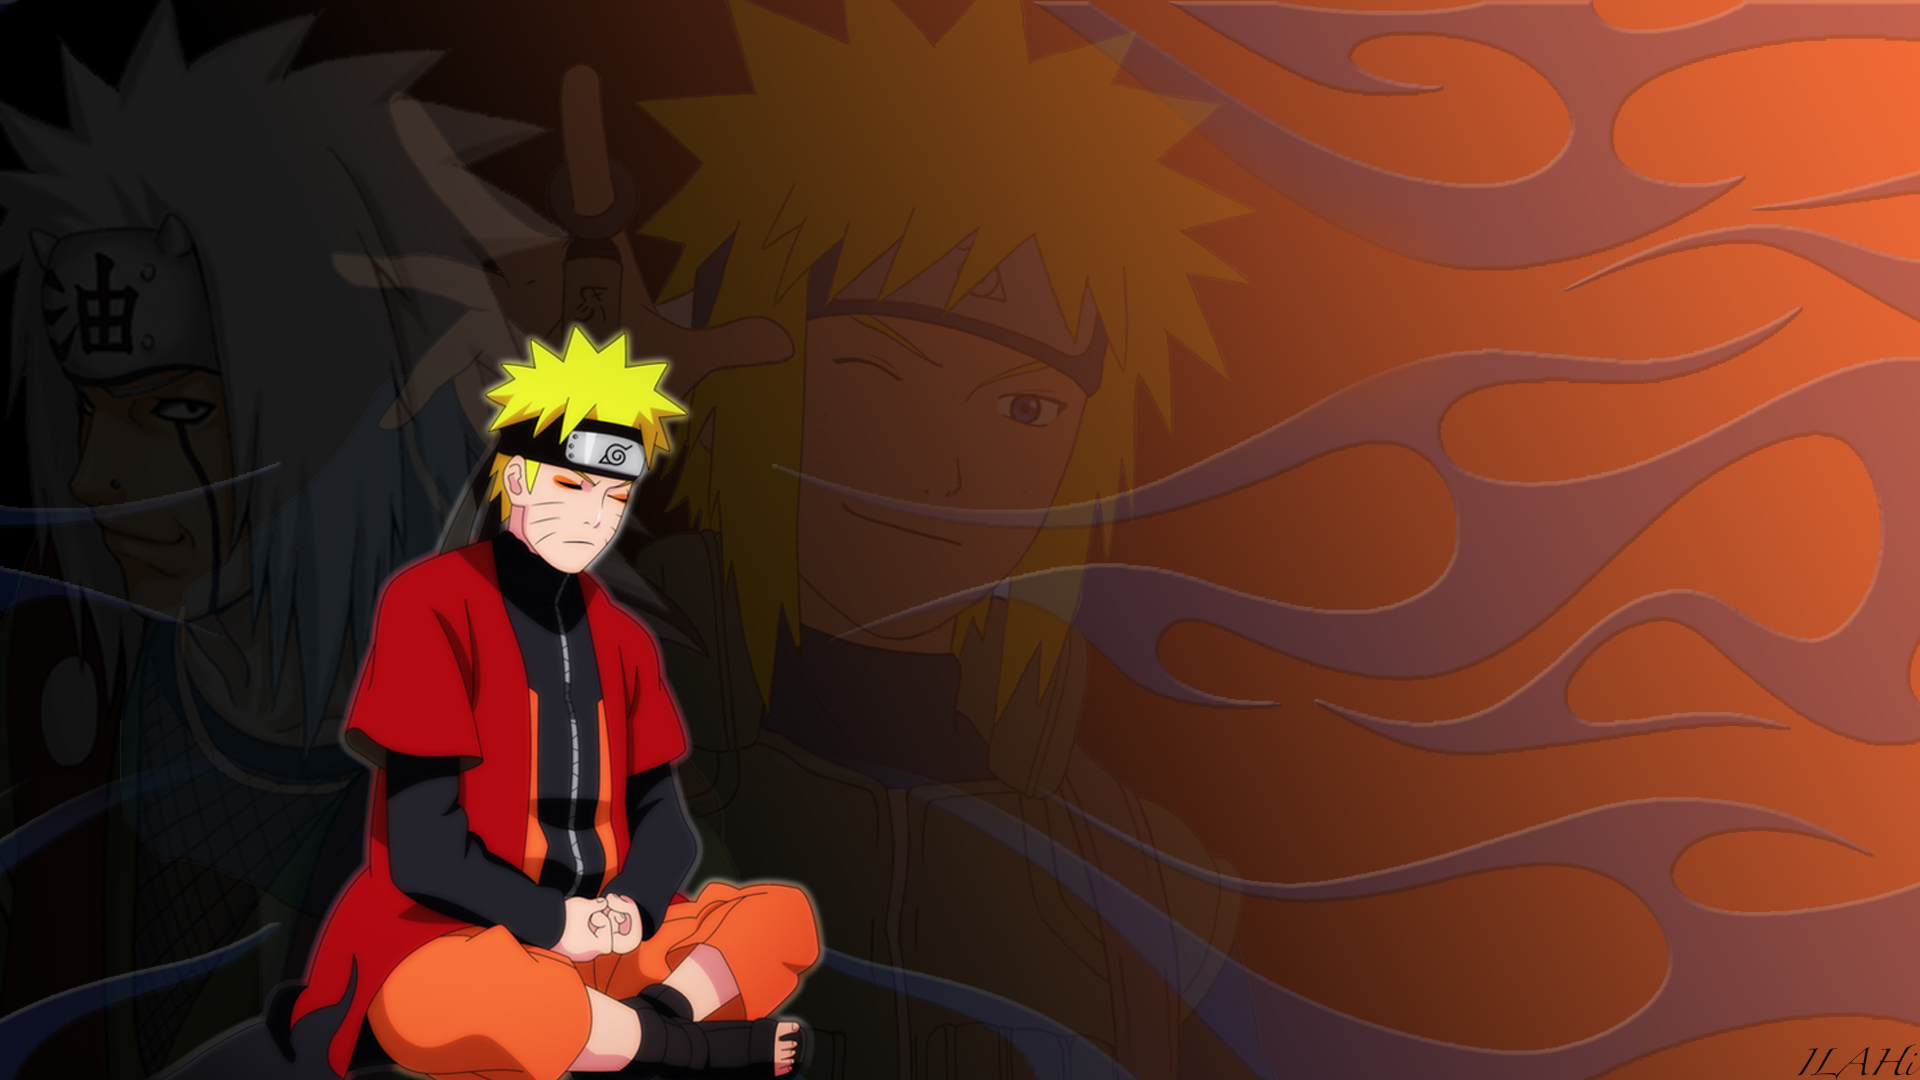 Download wallpaper cloak, Naruto, jiraiya, Minato, The mode of a hermit, section other in resolution 1920x1080